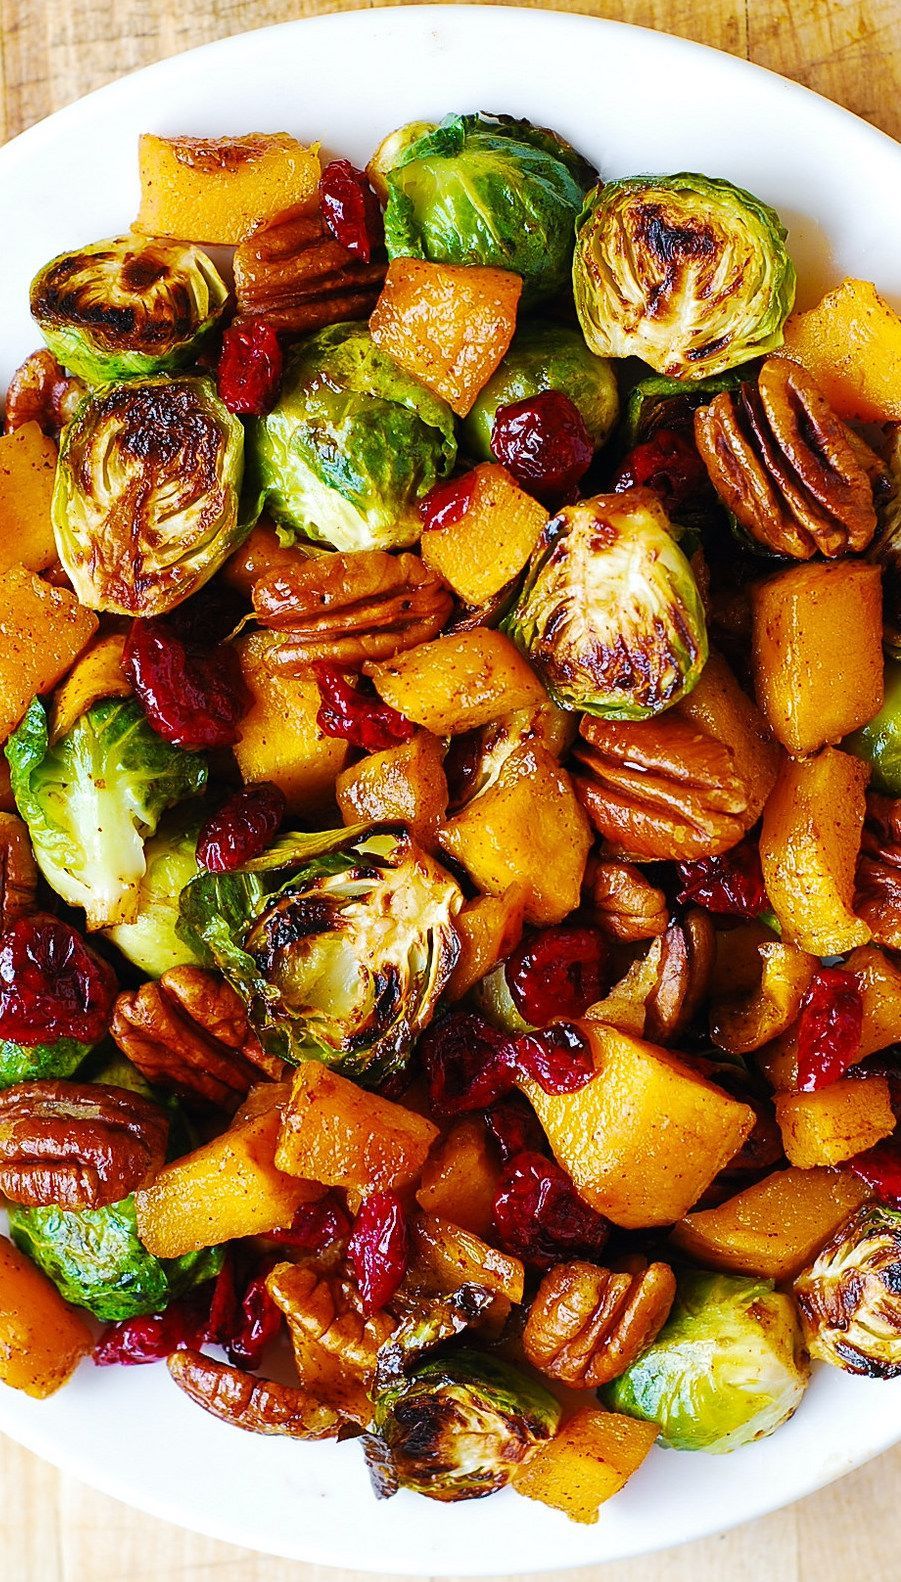 Roasted Butternut Squash and Brussels sprouts with Pecans and Cranberries - Roasted Butternut Squash and Brussels sprouts with Pecans and Cranberries -   19 thanksgiving recipes appetizers healthy ideas